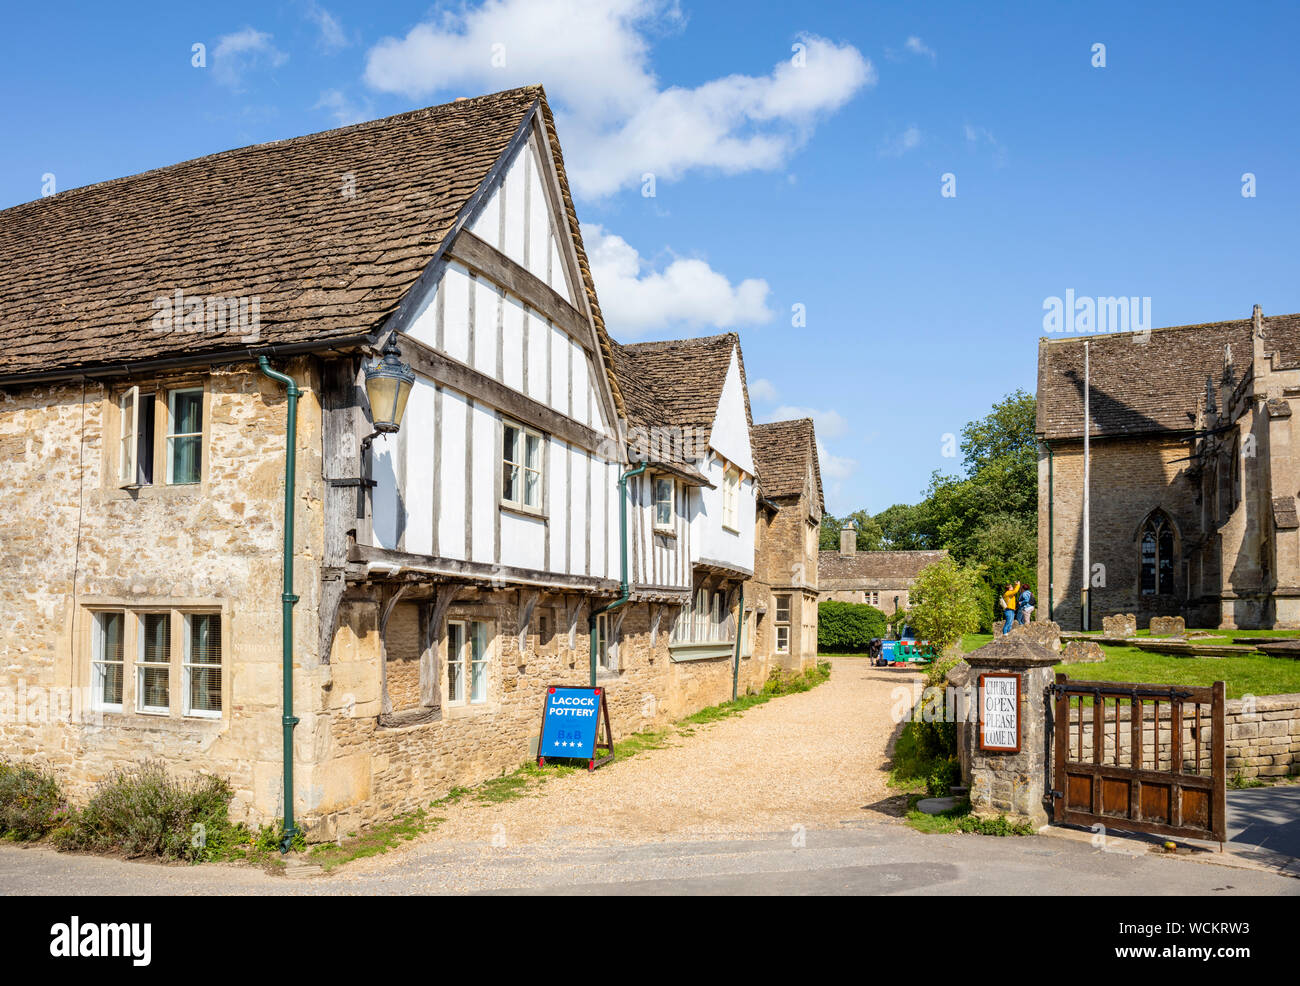 Lacock Pottery Bed & Breakfast Lacock village Wiltshire england uk gb Europe Stock Photo